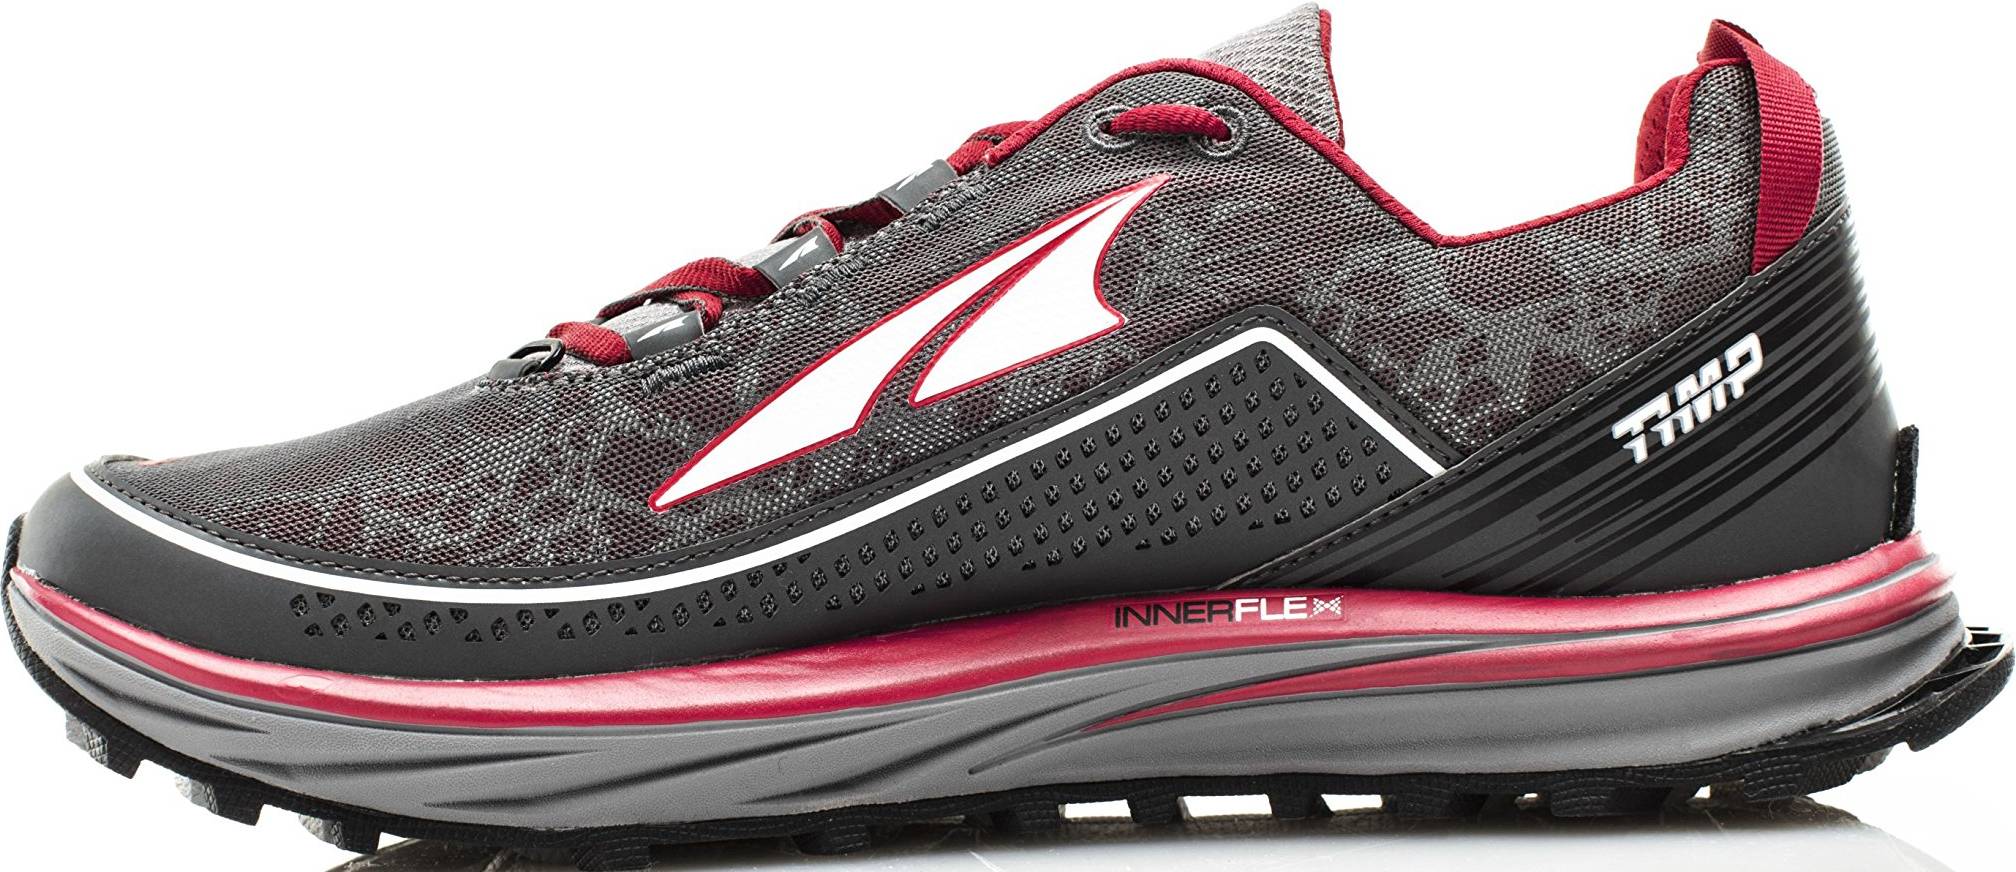 Only $78 + Review of Altra Timp | RunRepeat